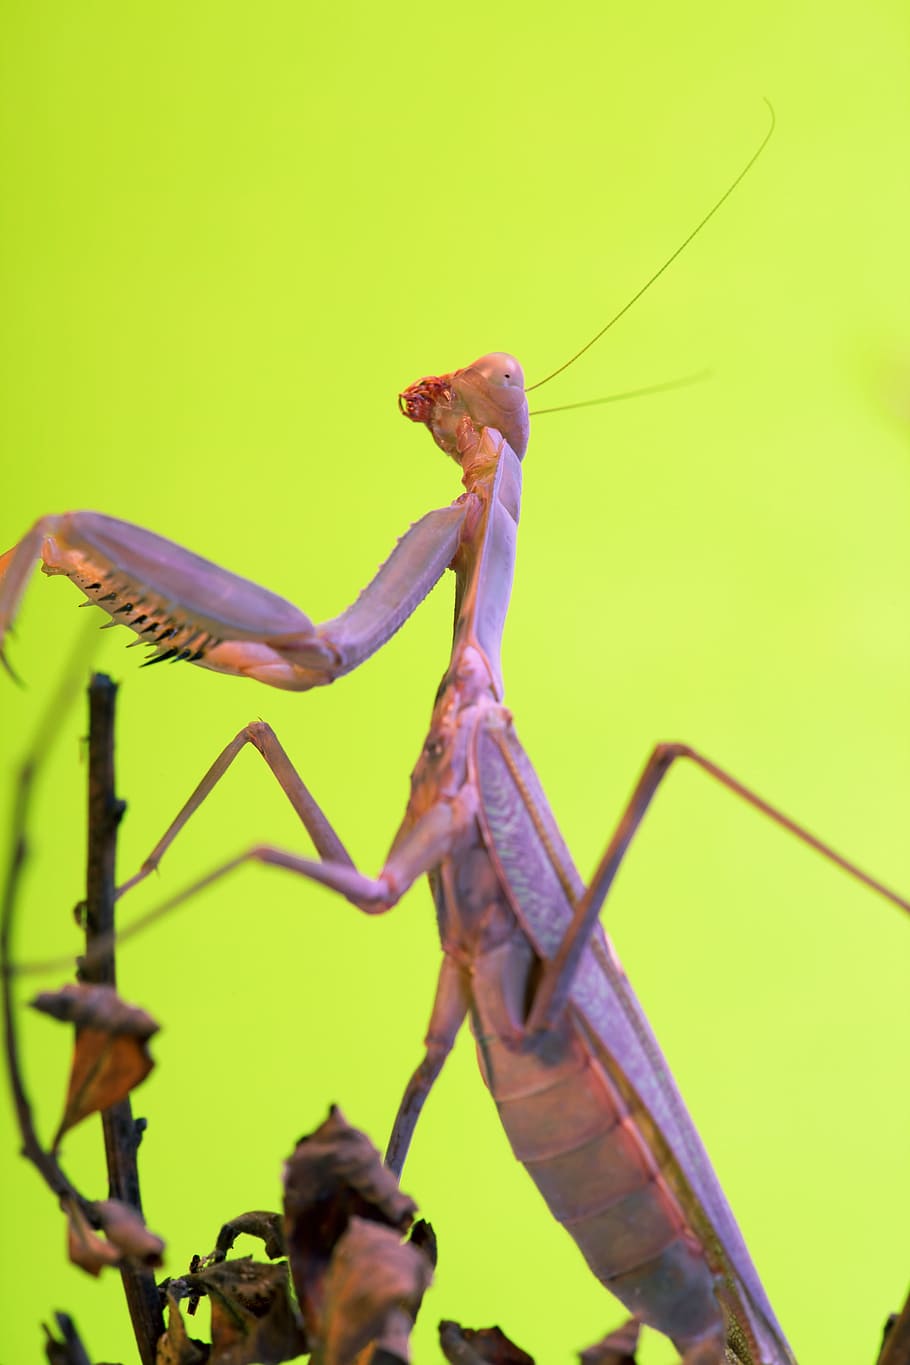 animal, antenna, arthropod, background, close-up, color, hunting, insect, mantis, nature